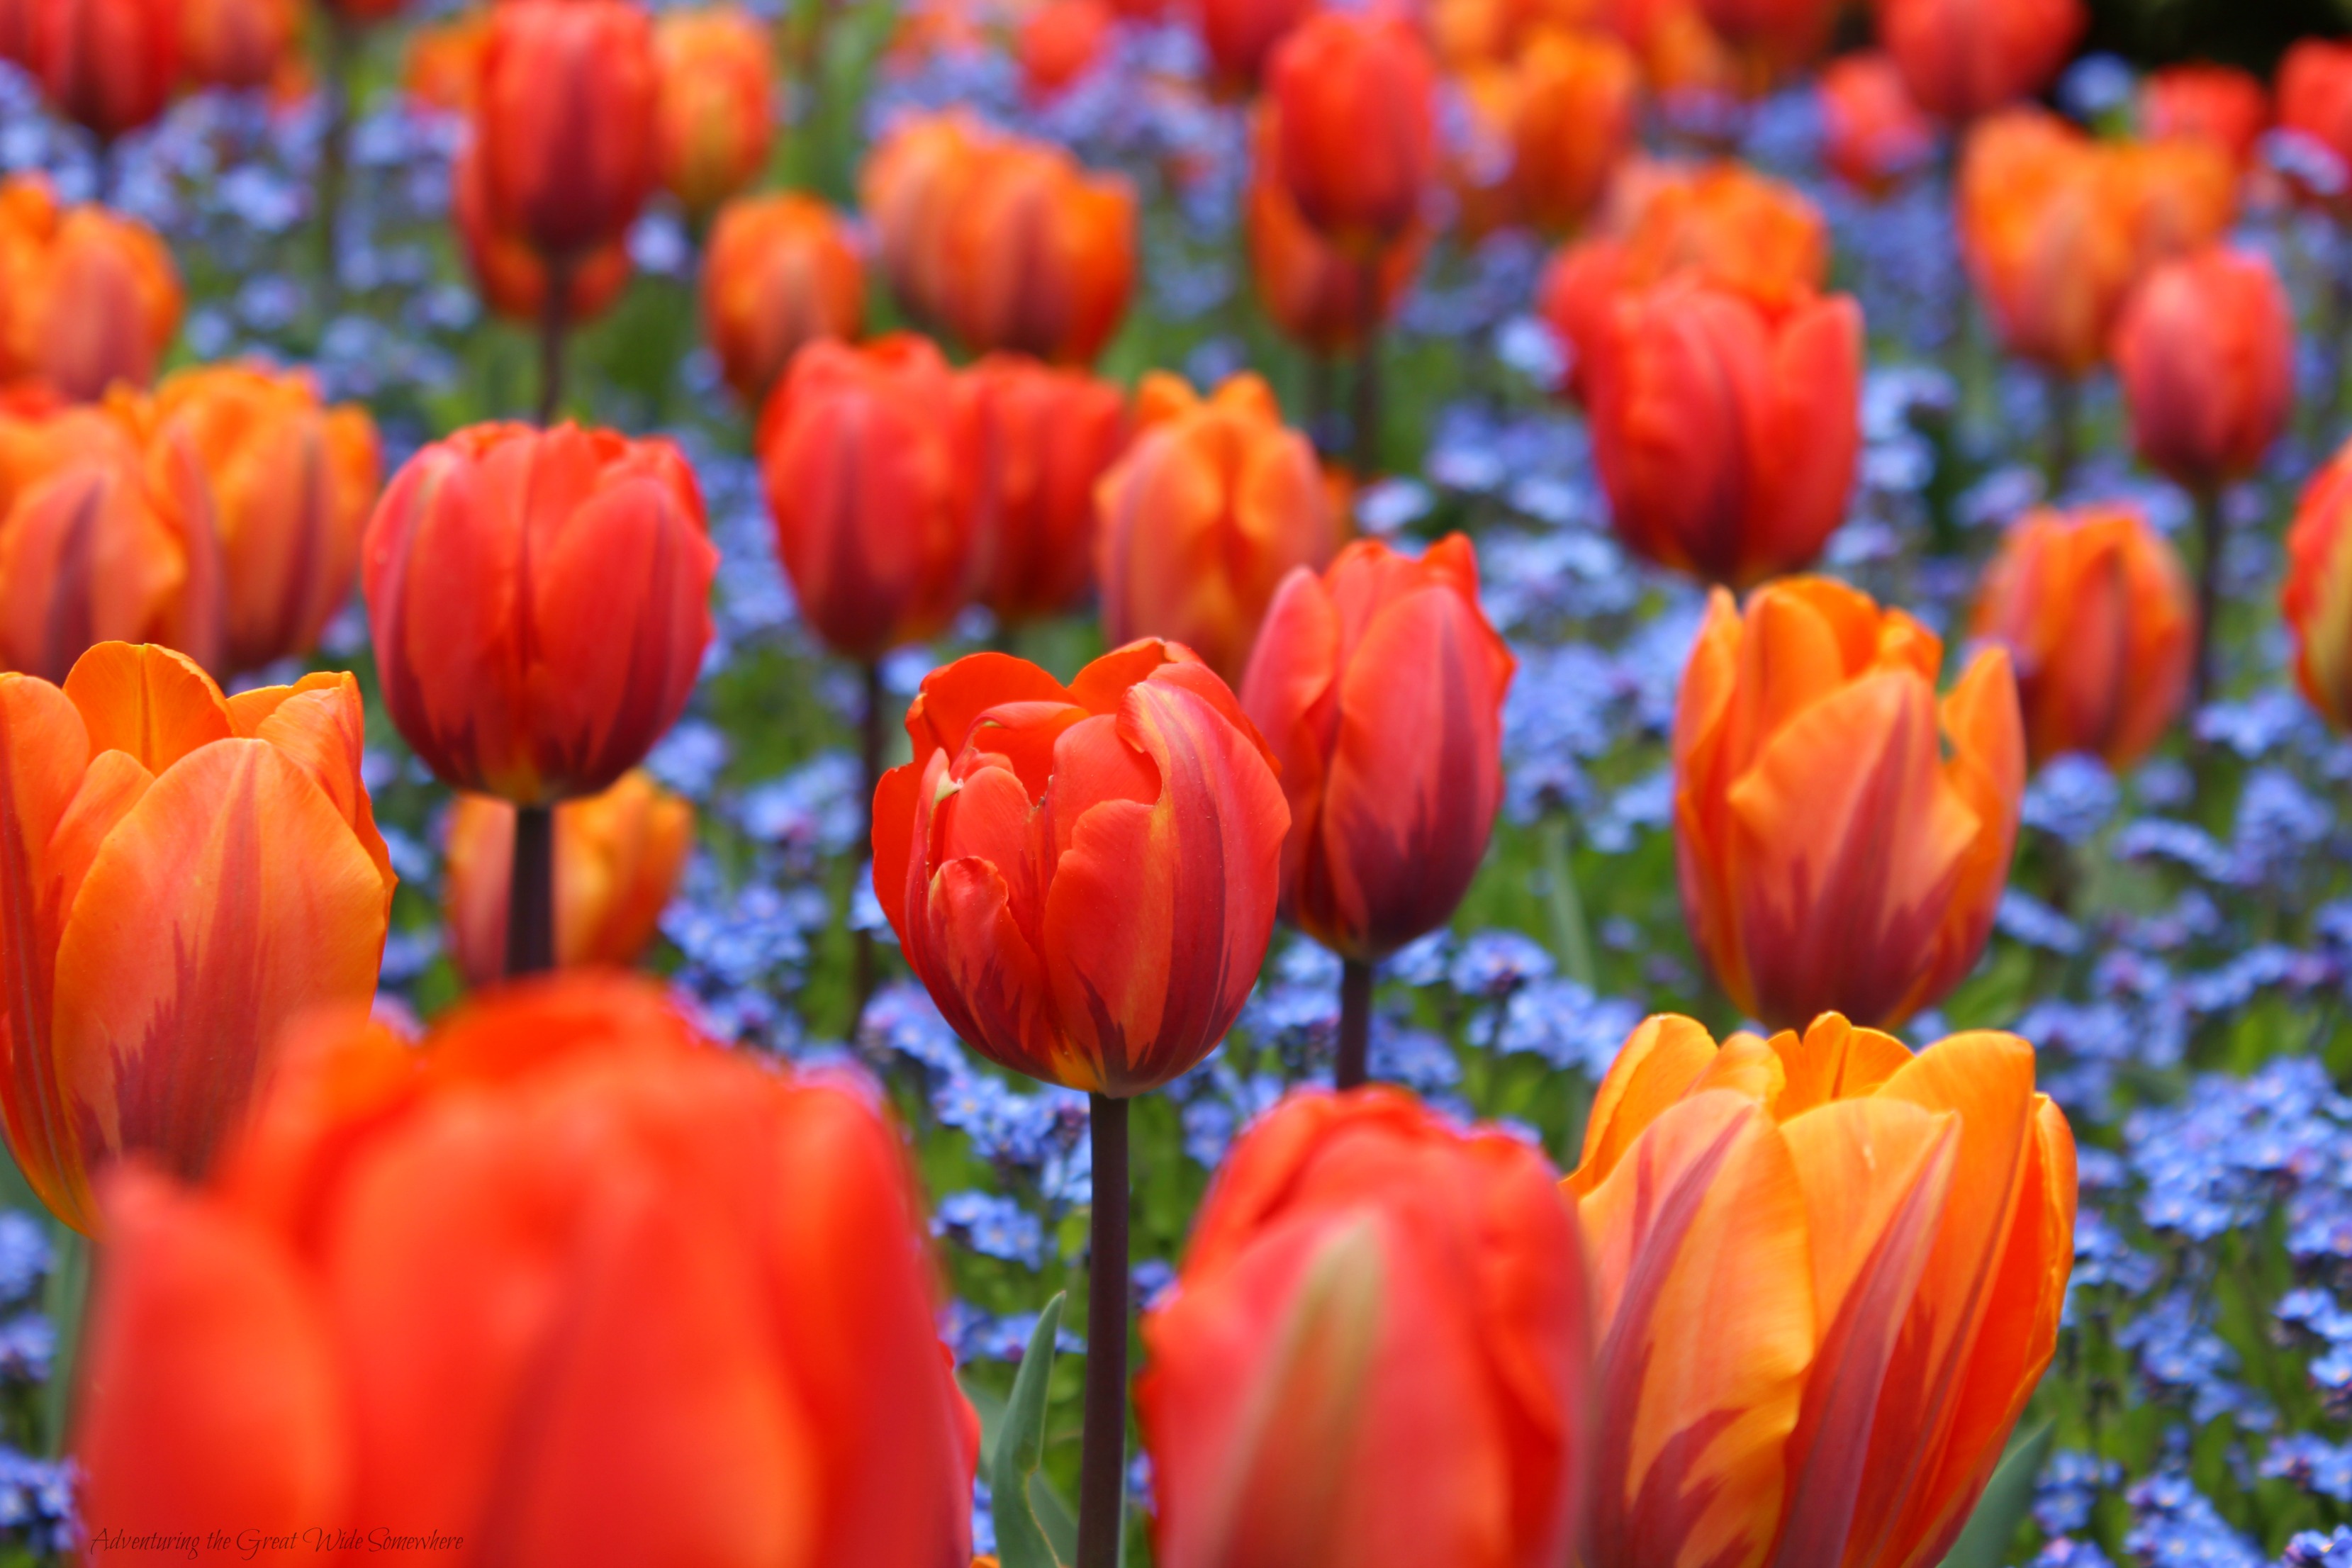 Fiery Red and Orange Tulips Light up Butchart Gardens